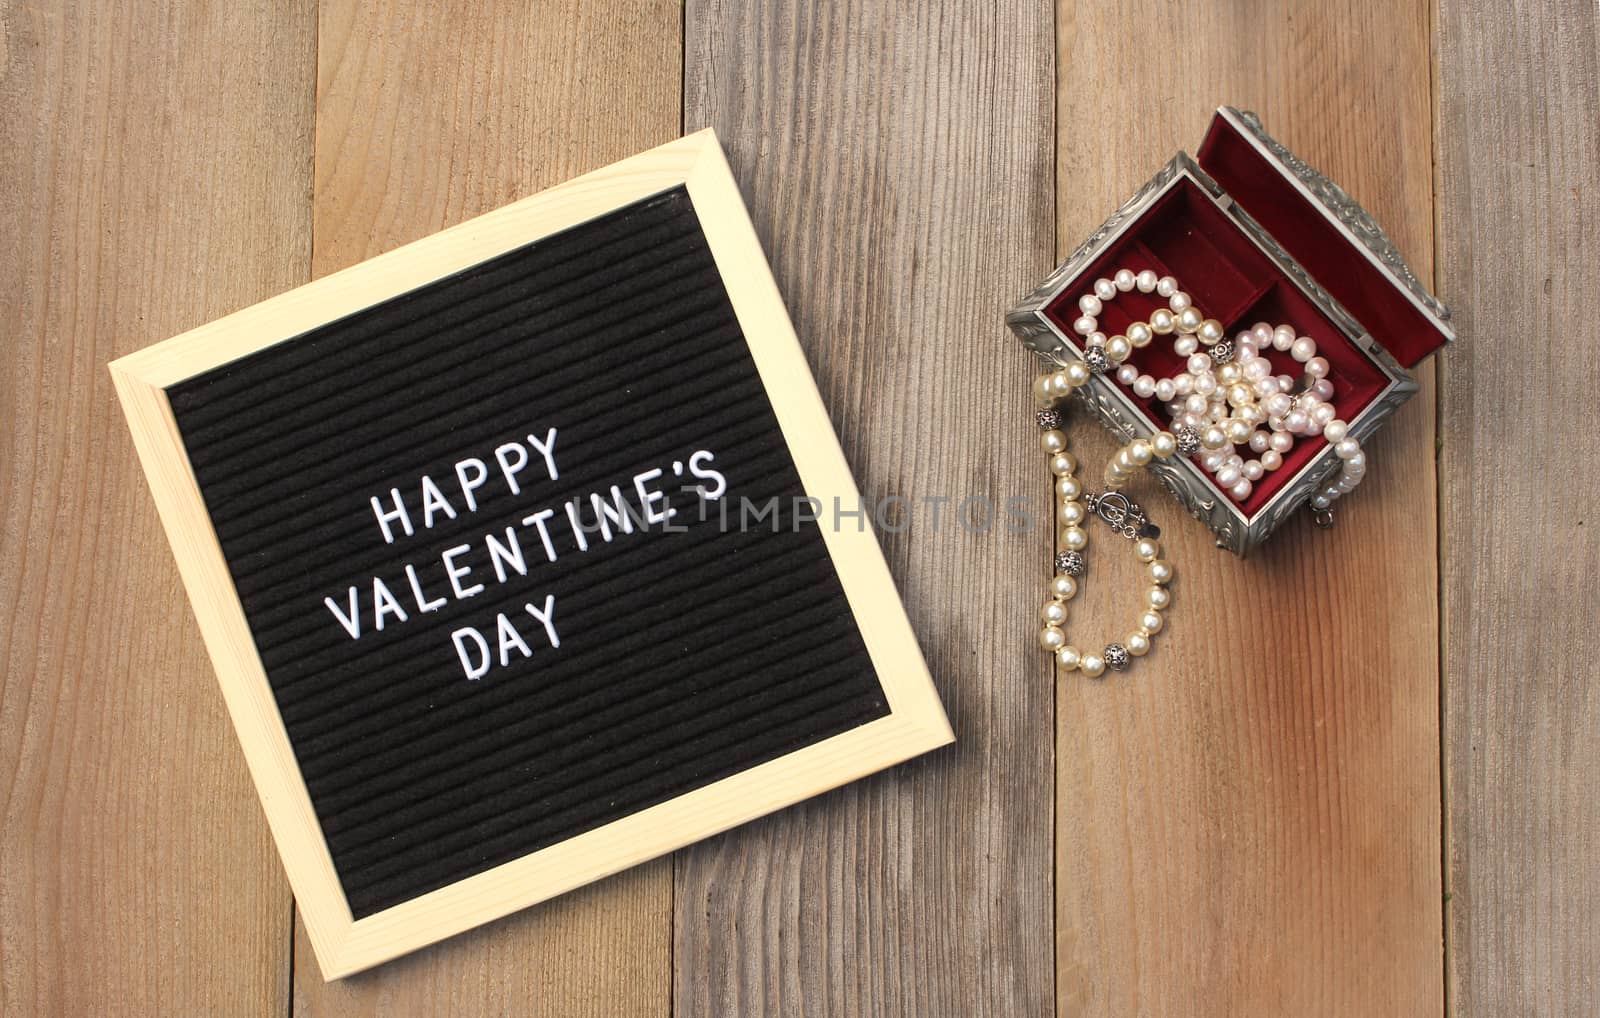 Happy Valentines Day Sign With Rose and Jewelry Box on Wooden Background